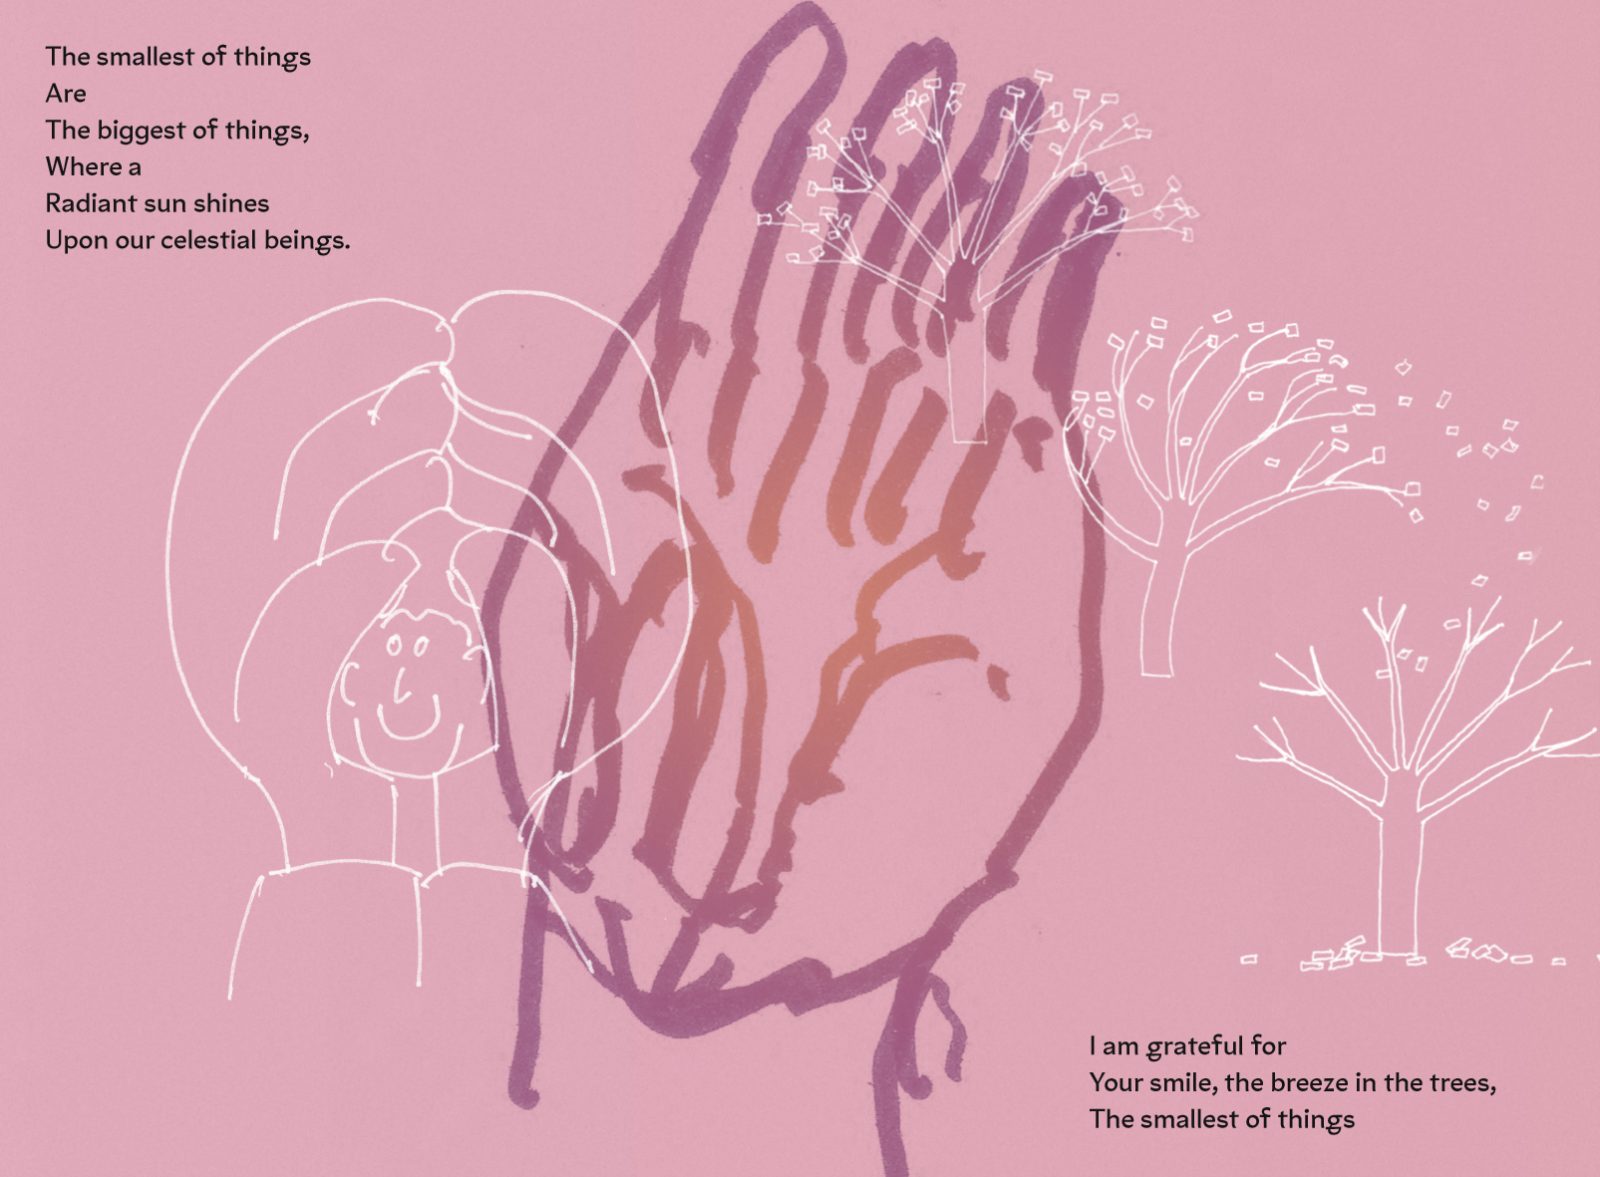 Pink pages of a the Your Make Me Feel Good Newspaper with purple and white line drawings and poetry in black text.